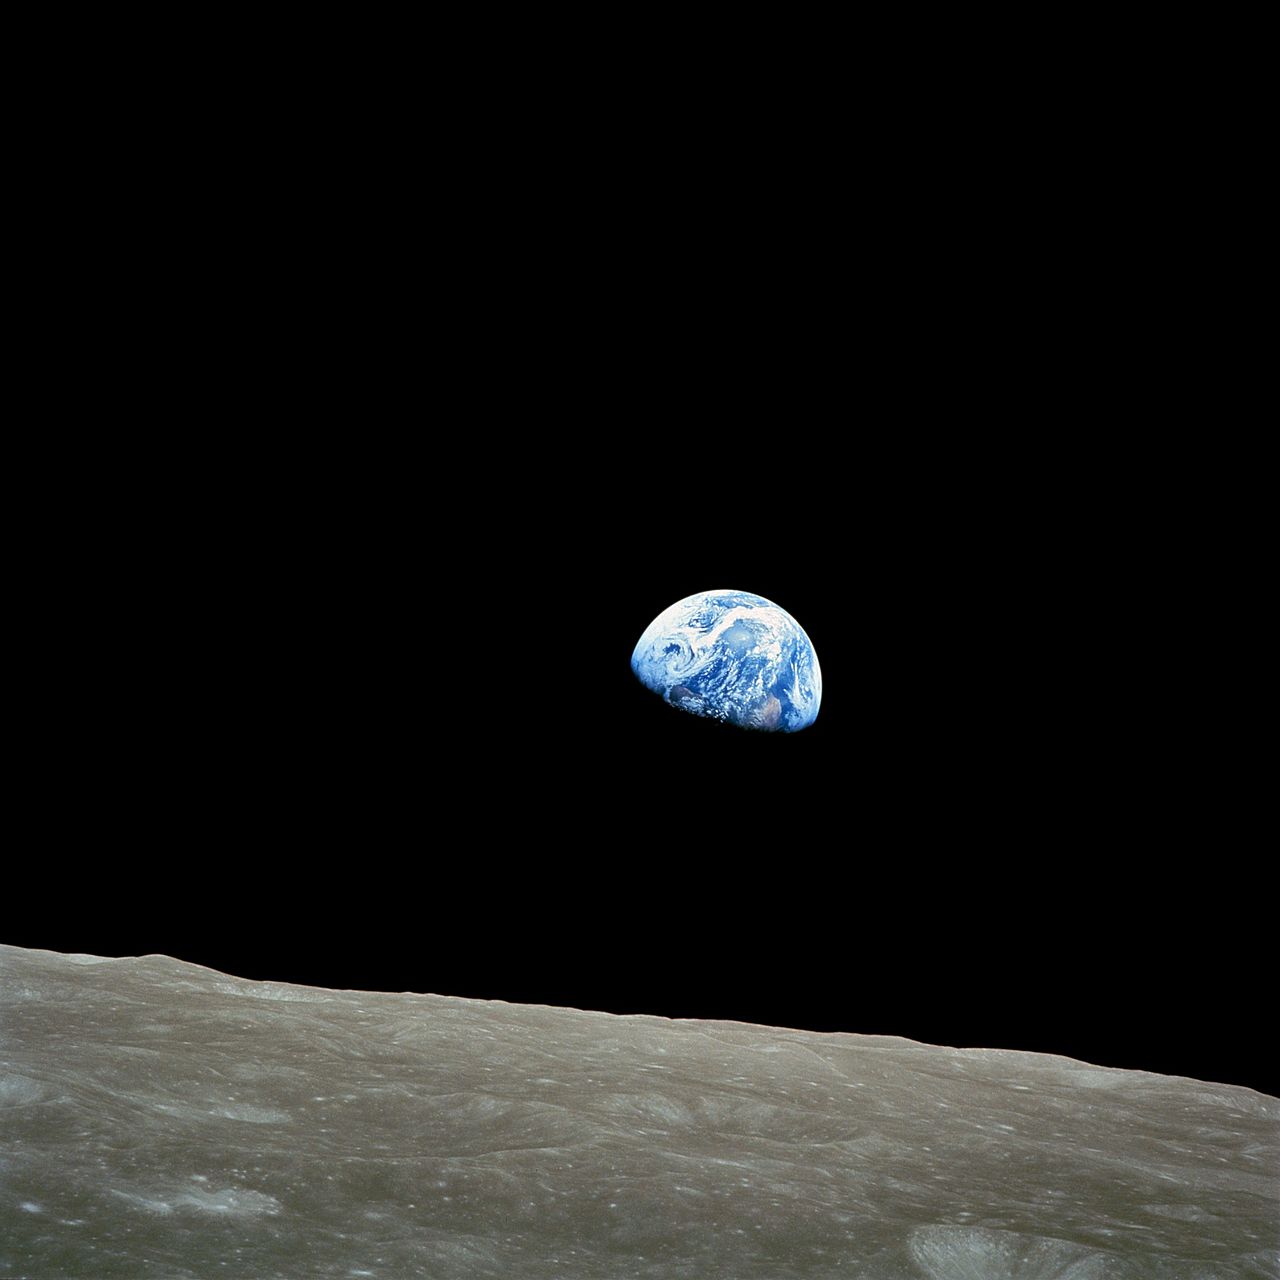 Image of Earthrise from Lunar Orbit.